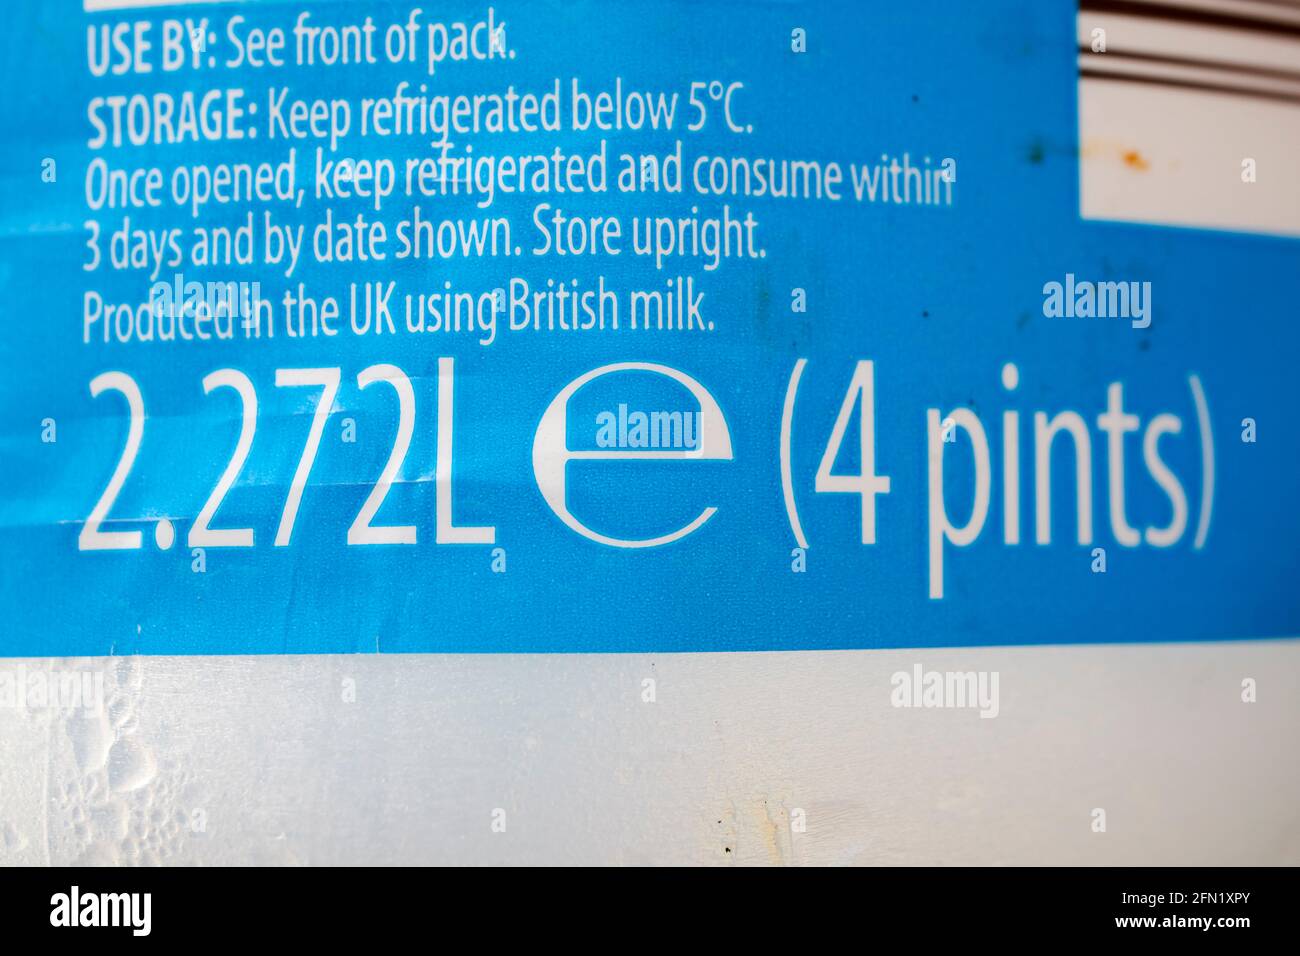 imperial measurement 4 pint (instead of 2 litres) british label on a bottle of british whole milk Stock Photo